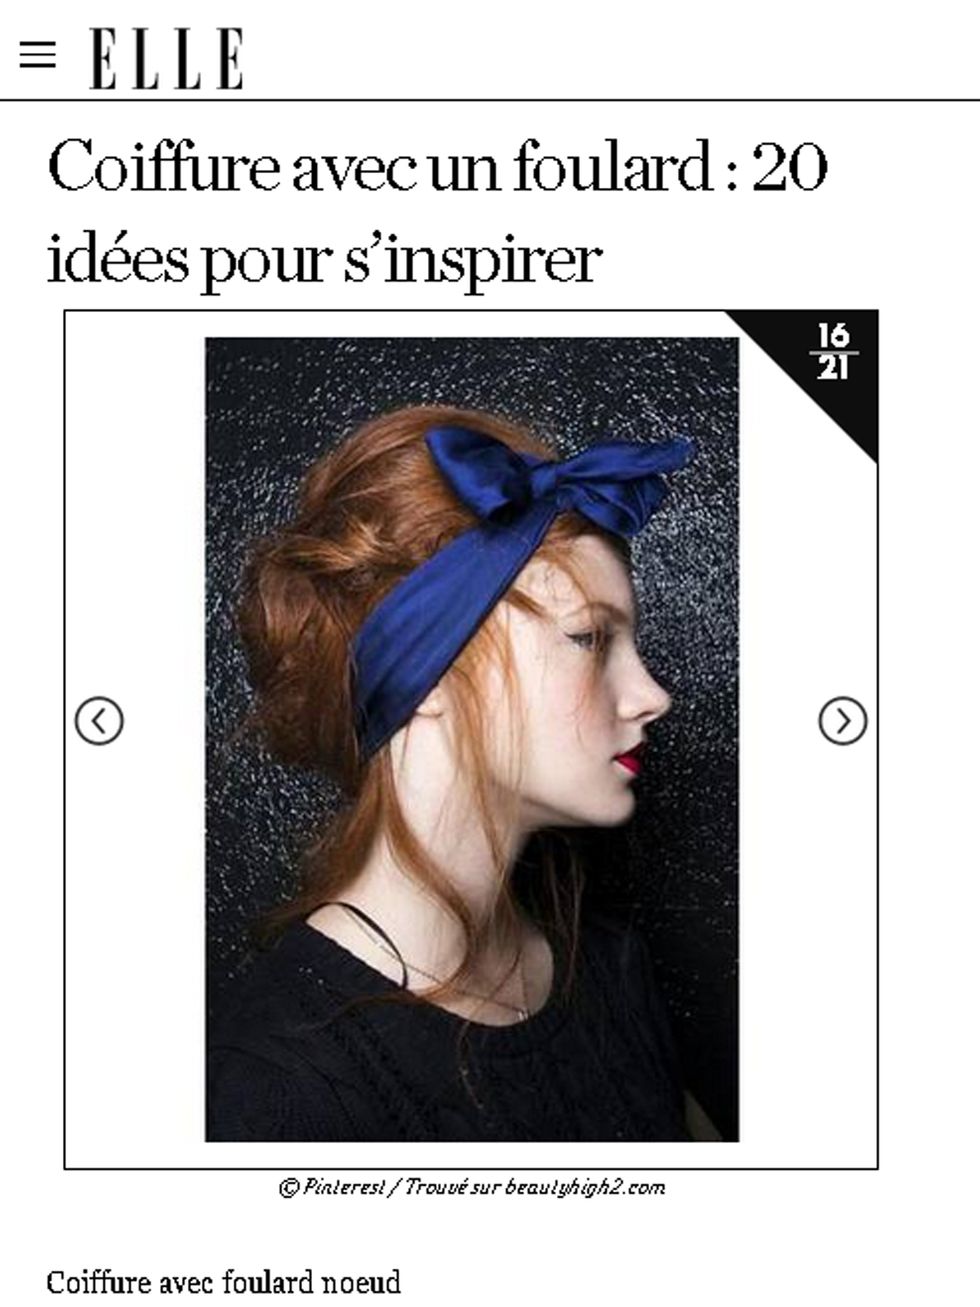 Headgear, Fashion accessory, Electric blue, Hair accessory, Feathered hair, Number, Screenshot, Earrings, Portrait, 